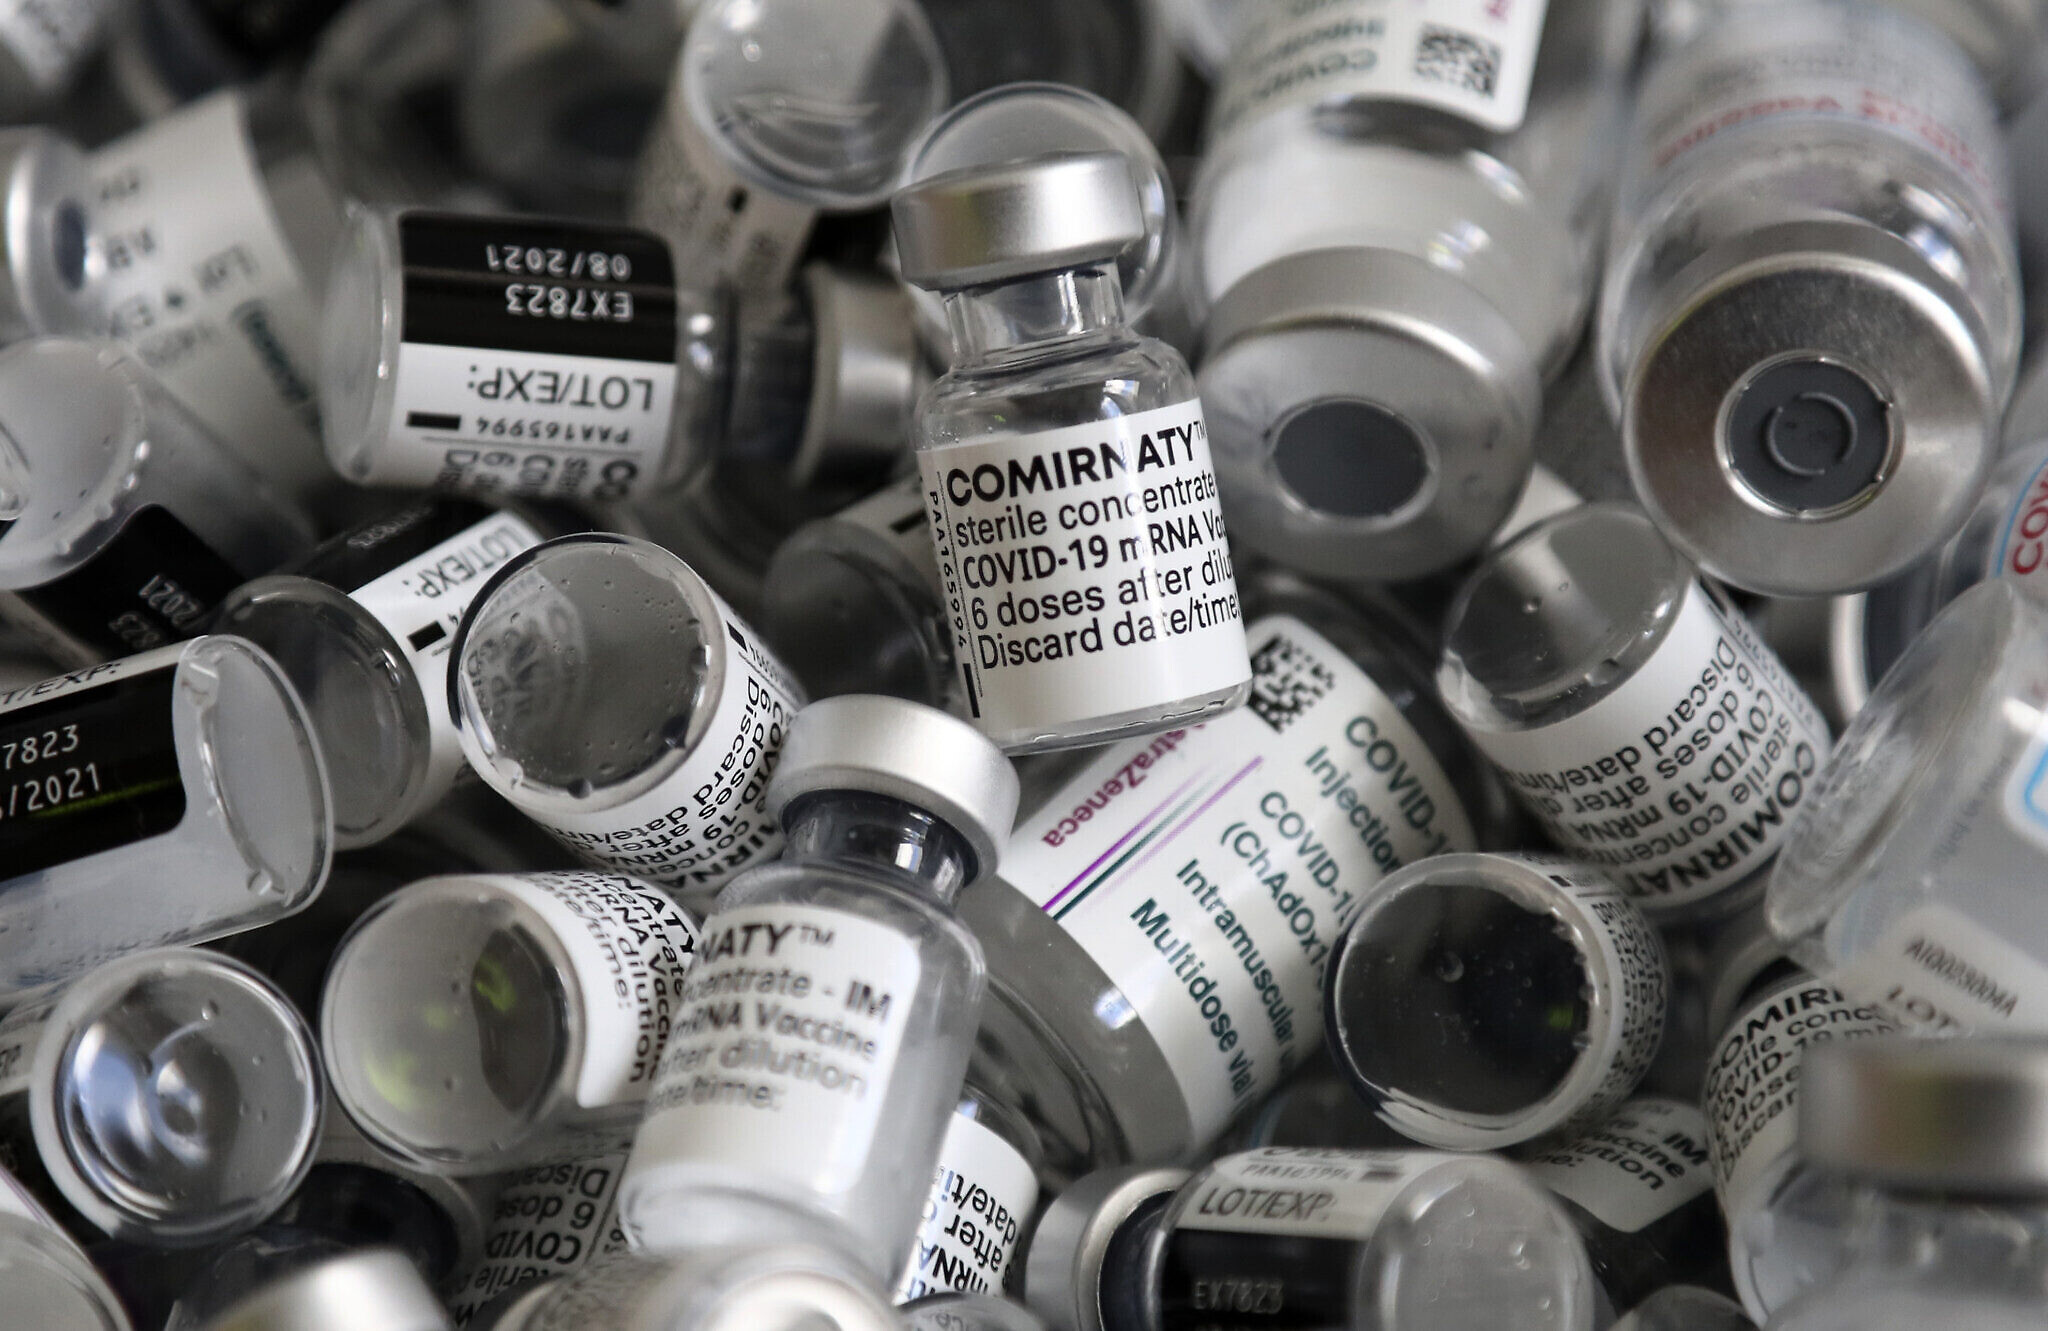 Israel may have to throw away nearly 1 million COVID vaccines | The Times of Israel